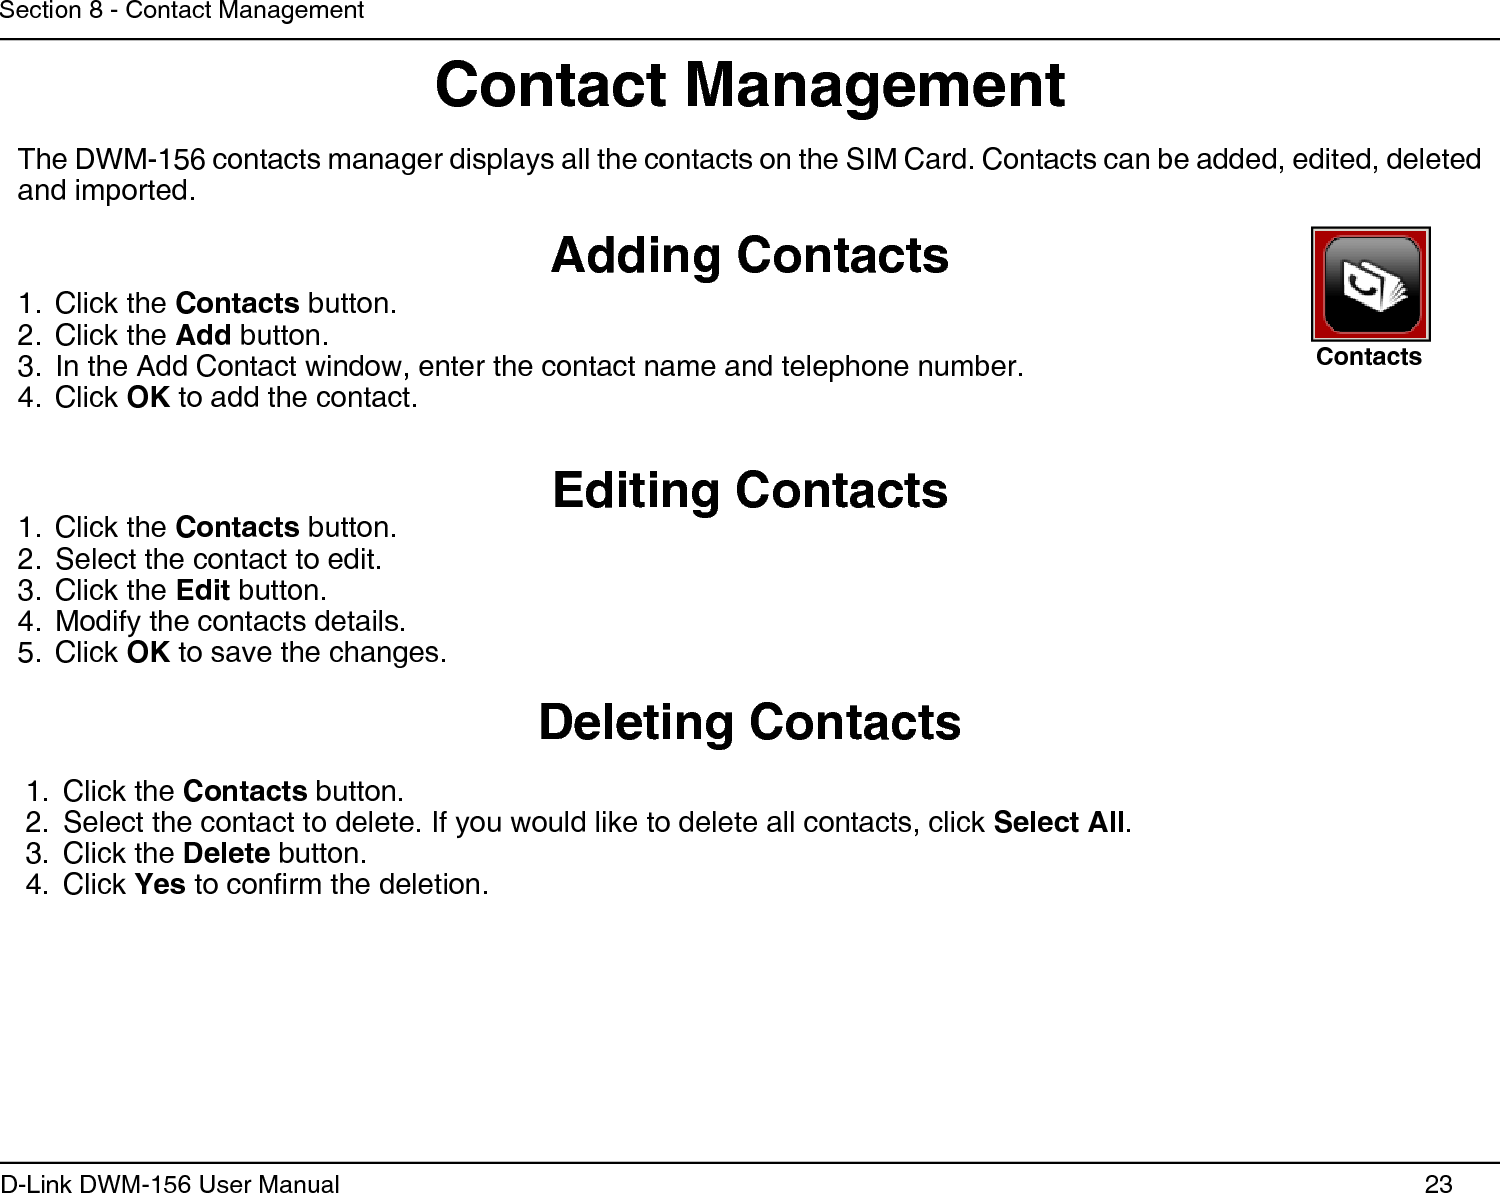 23D-Link DWM-156 User ManualSection 8 - Contact ManagementContact ManagementAdding ContactsDeleting ContactsEditing ContactsThe DWM-156 contacts manager displays all the contacts on the SIM Card. Contacts can be added, edited, deleted and imported.Click the 1.  Contacts button.Click the 2.  Add button.In the Add Contact window, enter the contact name and telephone number.3. Click 4.  OK to add the contact.Click the 1.  Contacts button.Select the contact to edit.2. Click the 3.  Edit button.Modify the contacts details.4. Click 5.  OK to save the changes.Click the 1.  Contacts button.Select the contact to delete. If you would like to delete all contacts, click 2.  Select All.Click the 3.  Delete button.Click 4.  Yes to conrm the deletion.Contacts